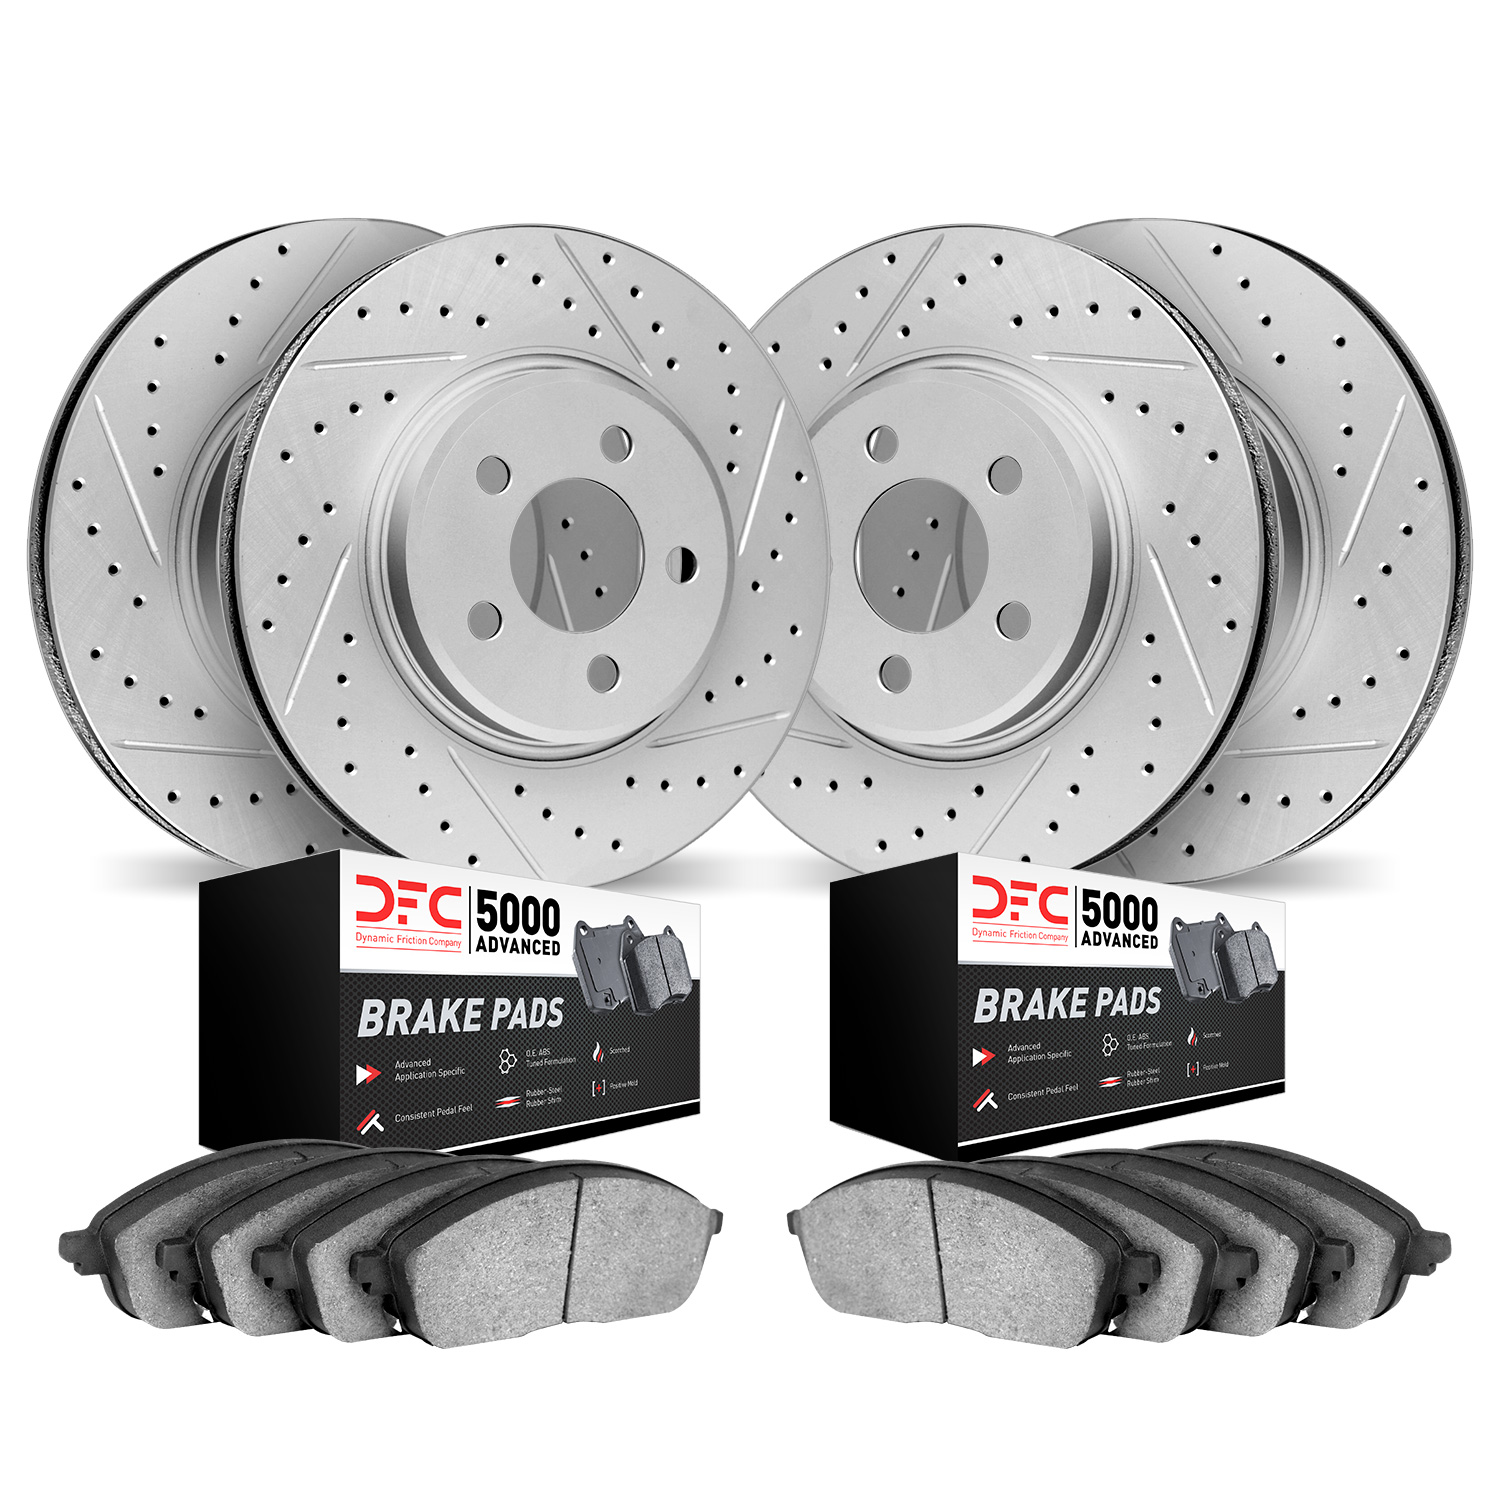 2504-39011 Geoperformance Drilled/Slotted Rotors w/5000 Advanced Brake Pads Kit, 2005-2018 Mopar, Position: Front and Rear